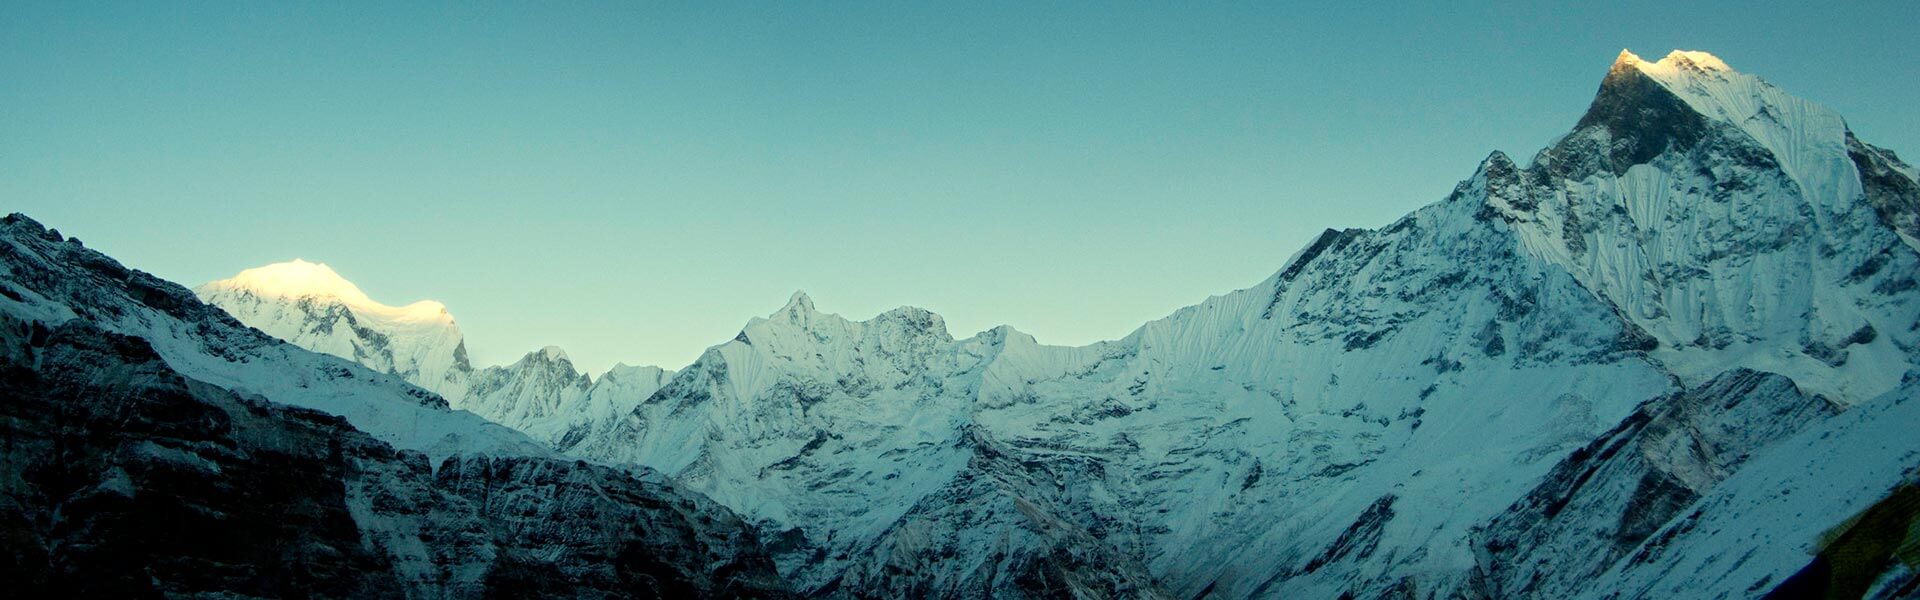 When is the Best Time for Annapurna Circuit Trek?